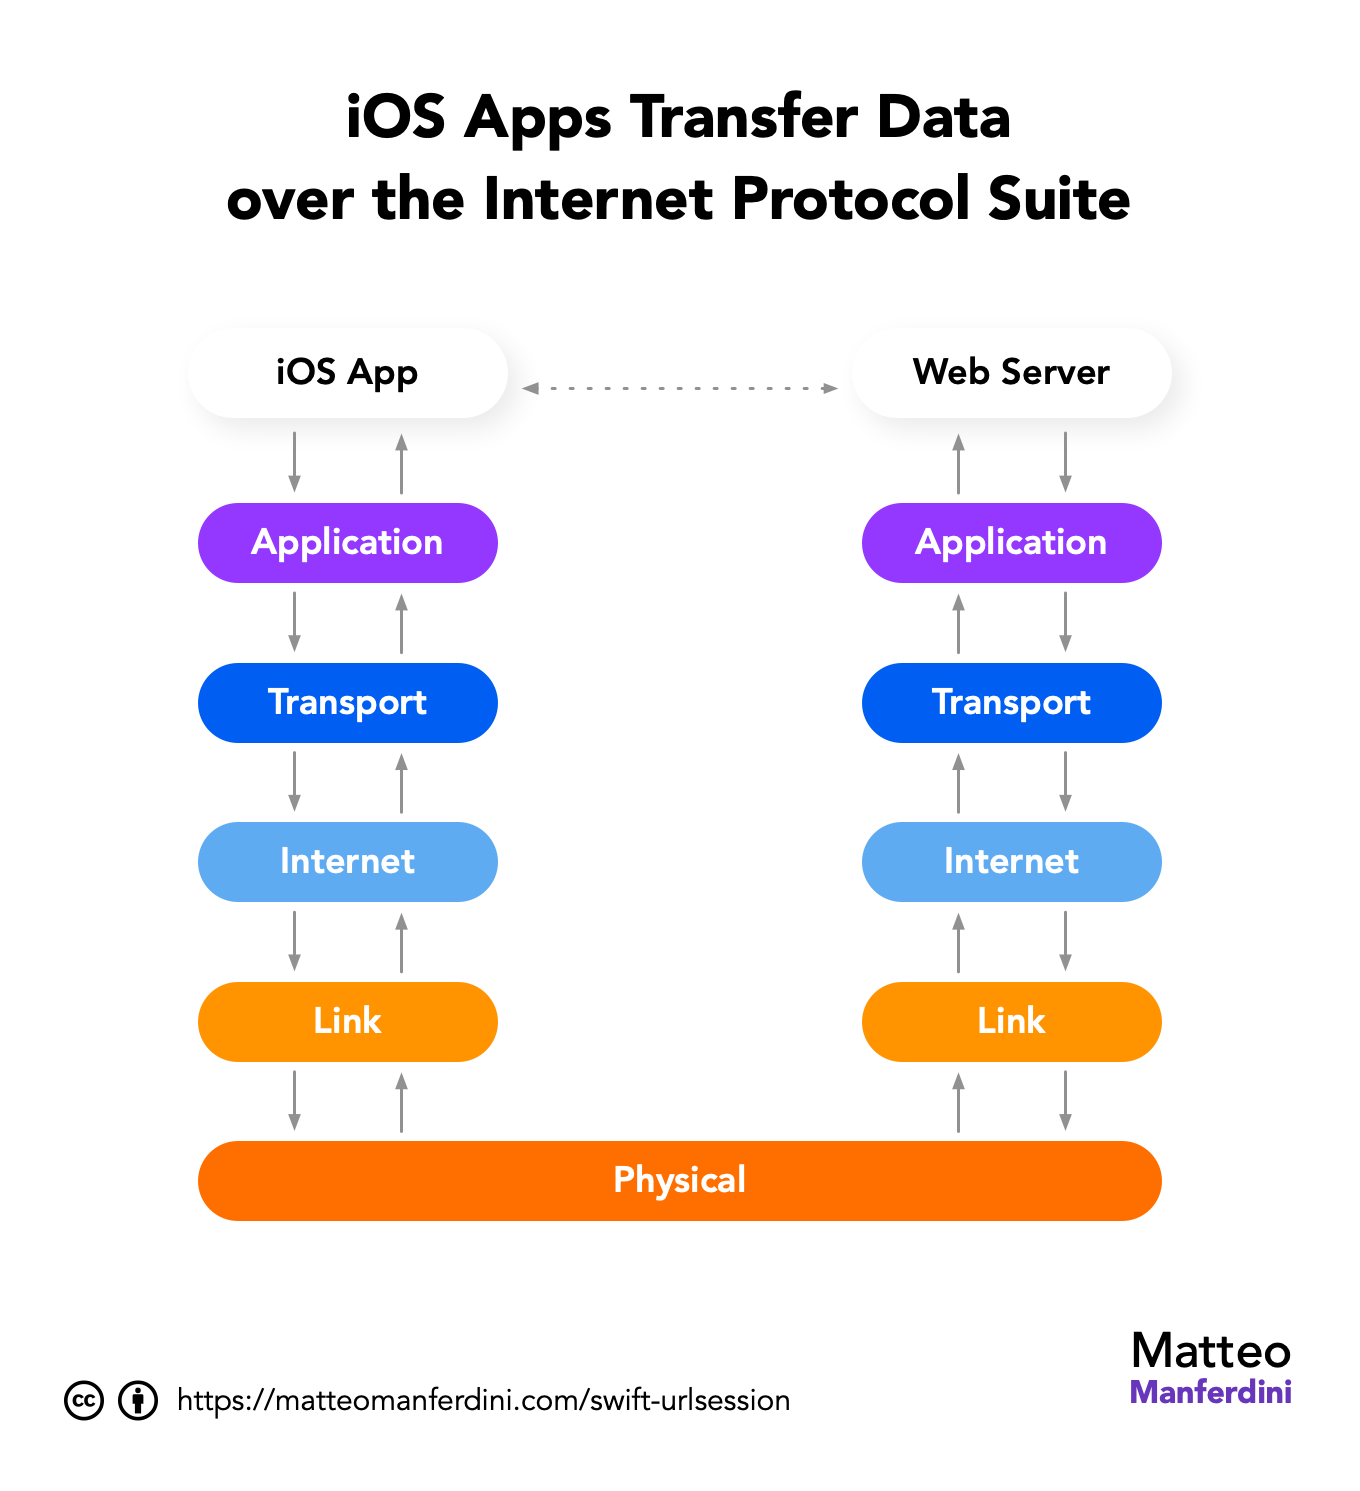 iOS Apps Transfer Data over the Internet Protocol Suite